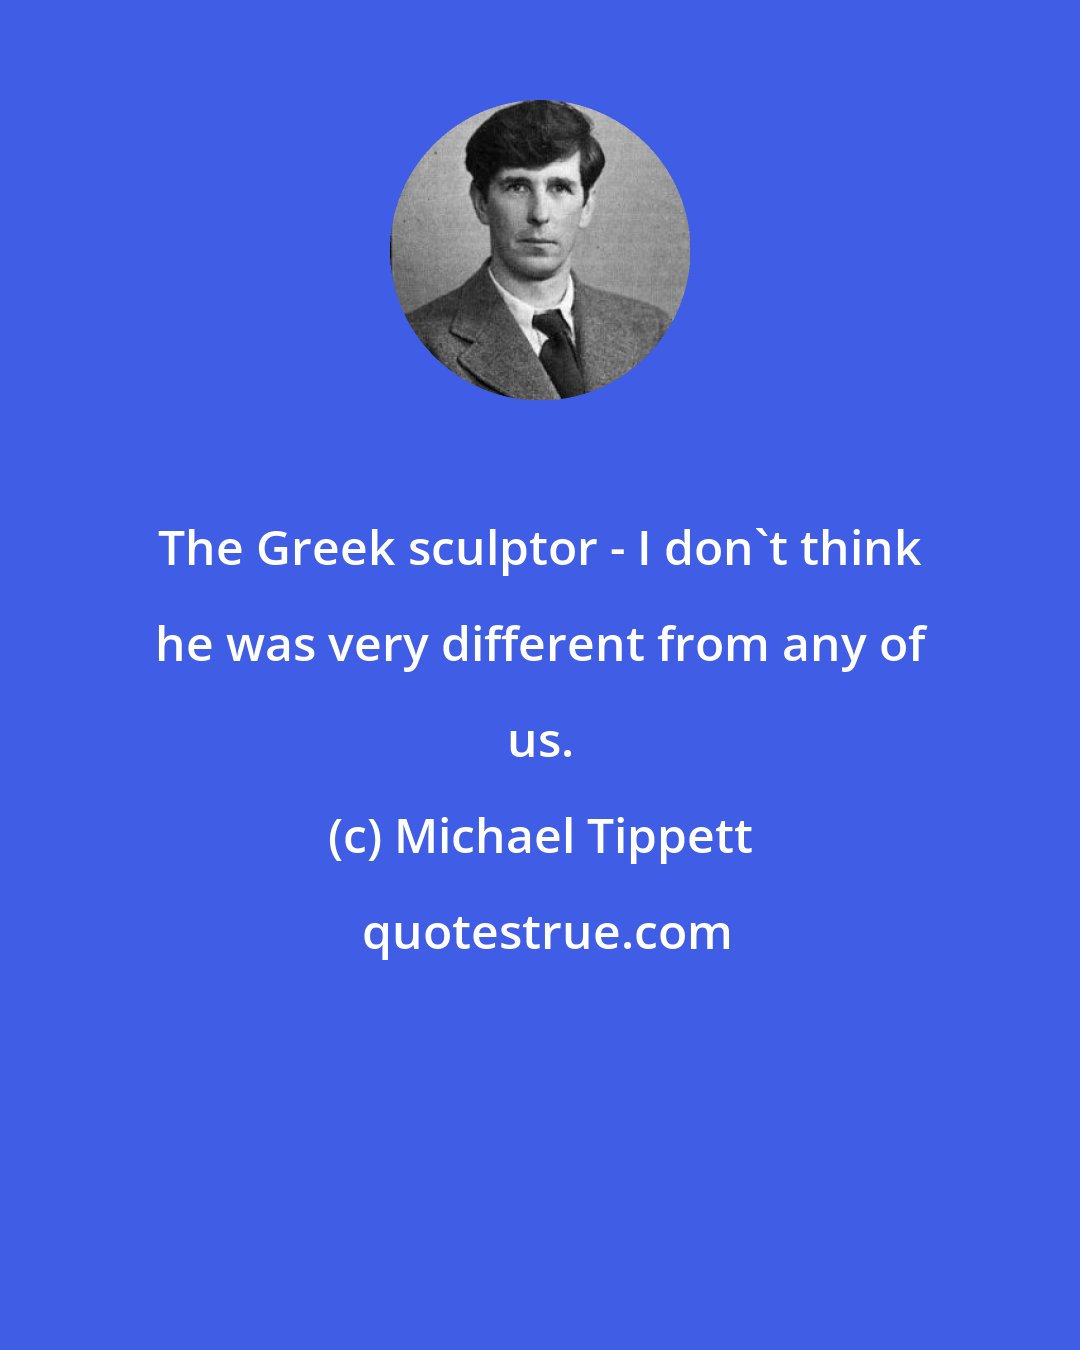 Michael Tippett: The Greek sculptor - I don't think he was very different from any of us.